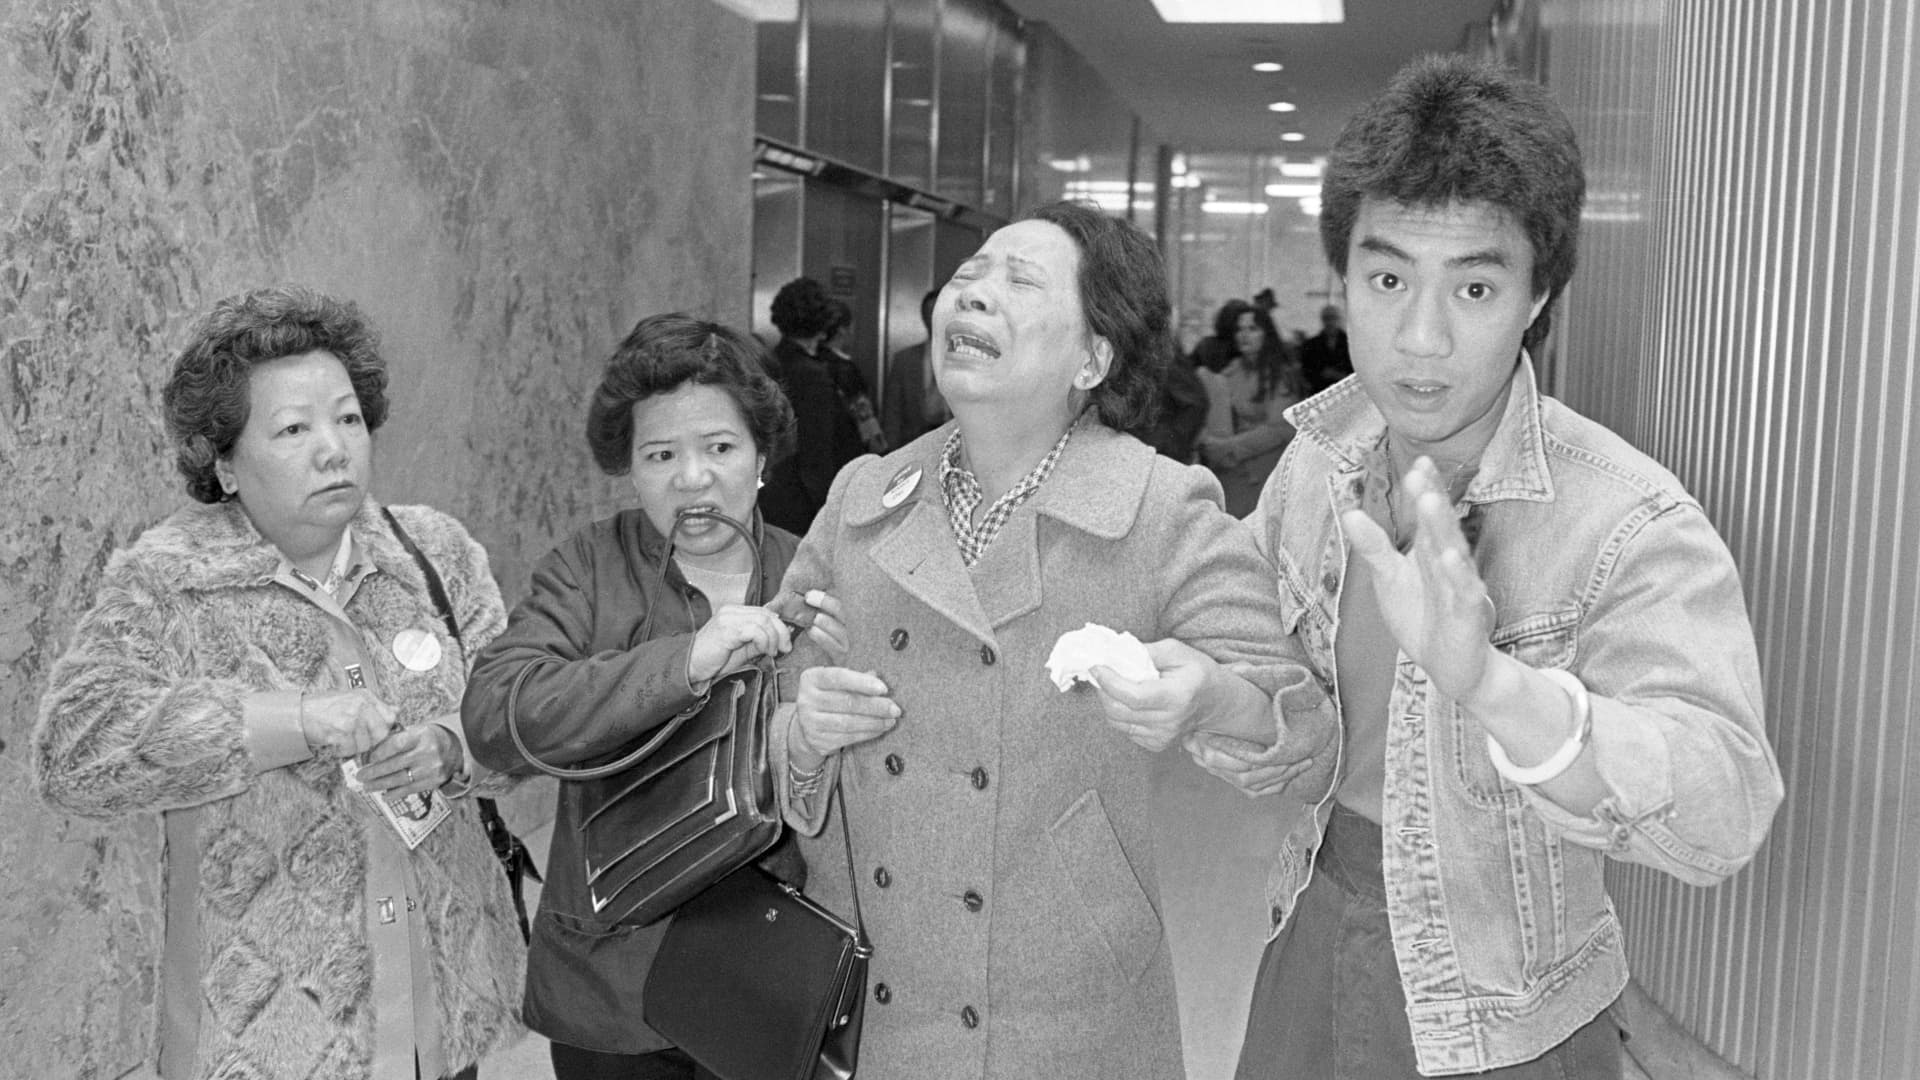 Lillie Chin, mother of Vincent Chin who was clubbed to death by two white men in June 1982, breaks down as a relative (L), helps her walk while leaving Detroit's City County Building in April, 1983.